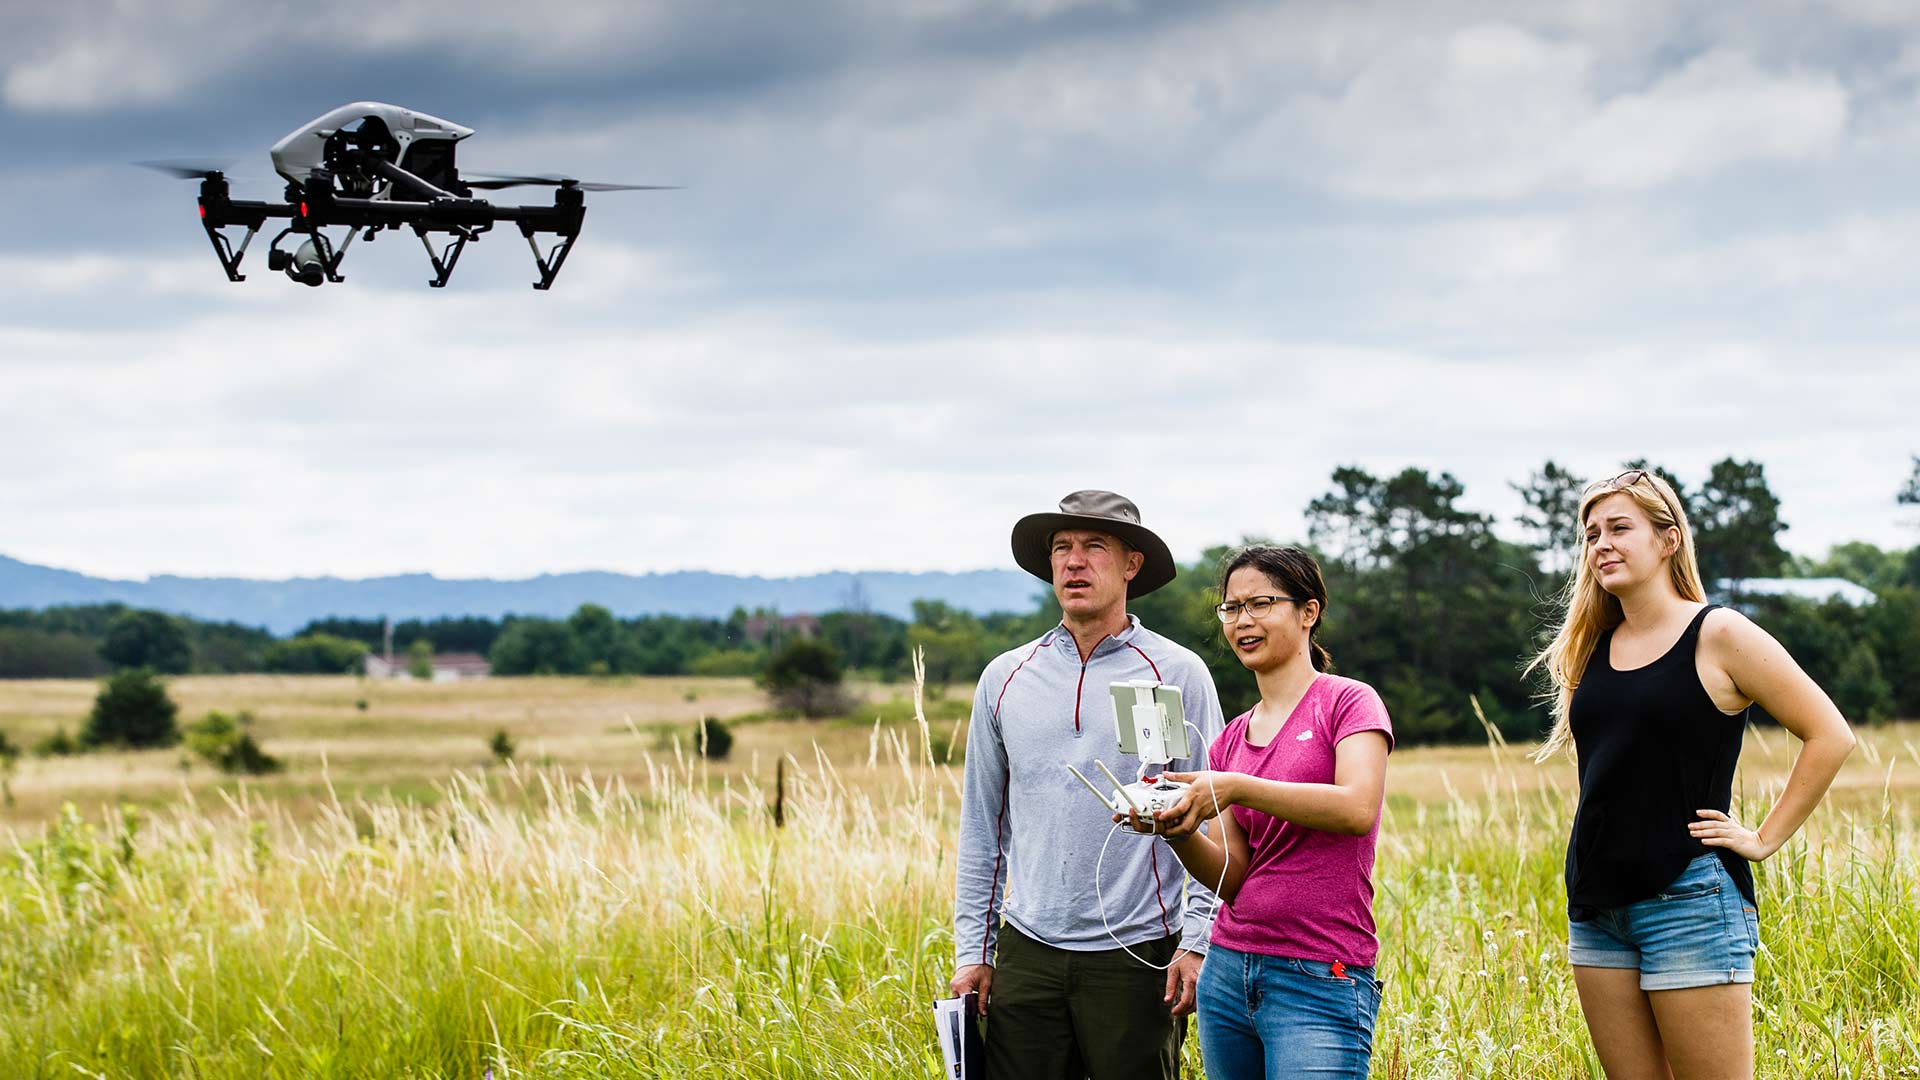 Professor and two students conduct research with the help of a drone in a field.